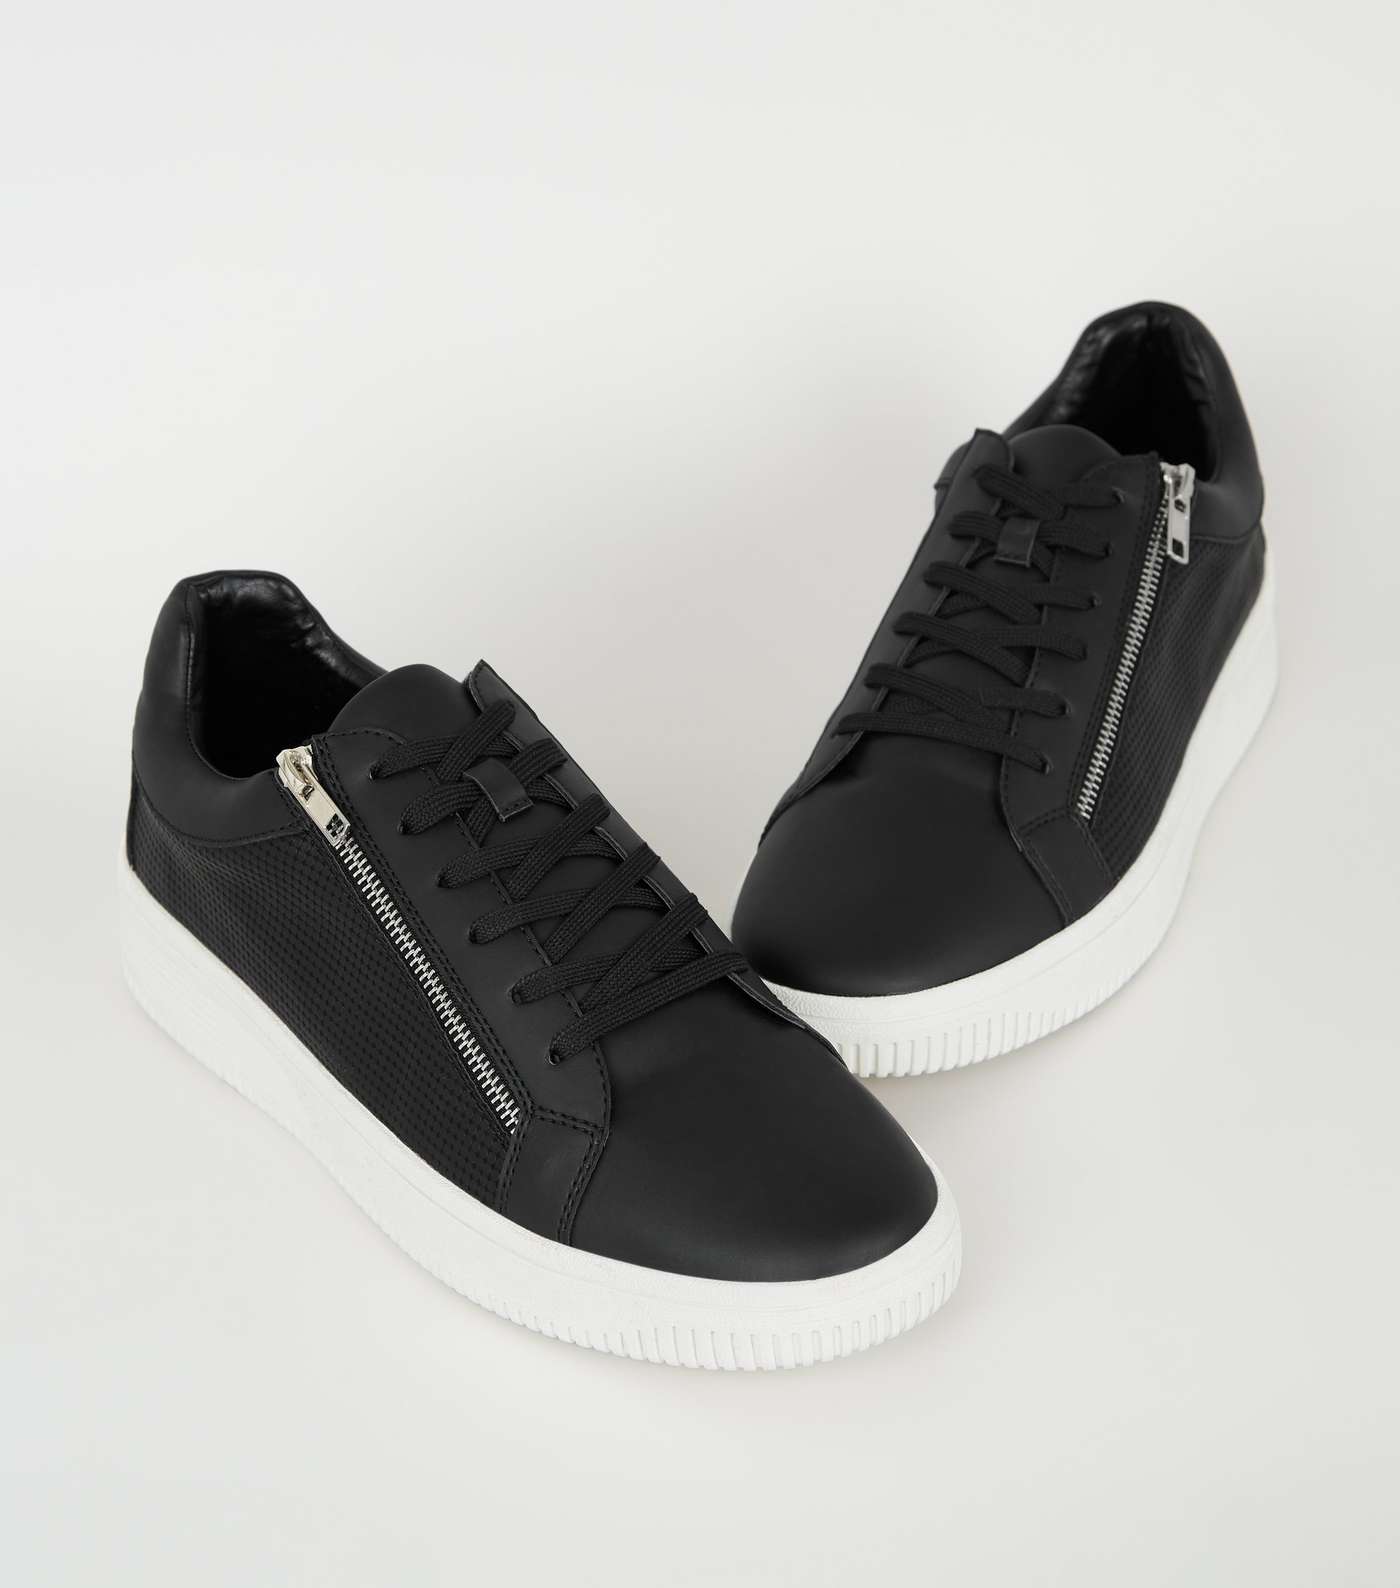 Black Textured Leather-Look Zip Side Trainers Image 3